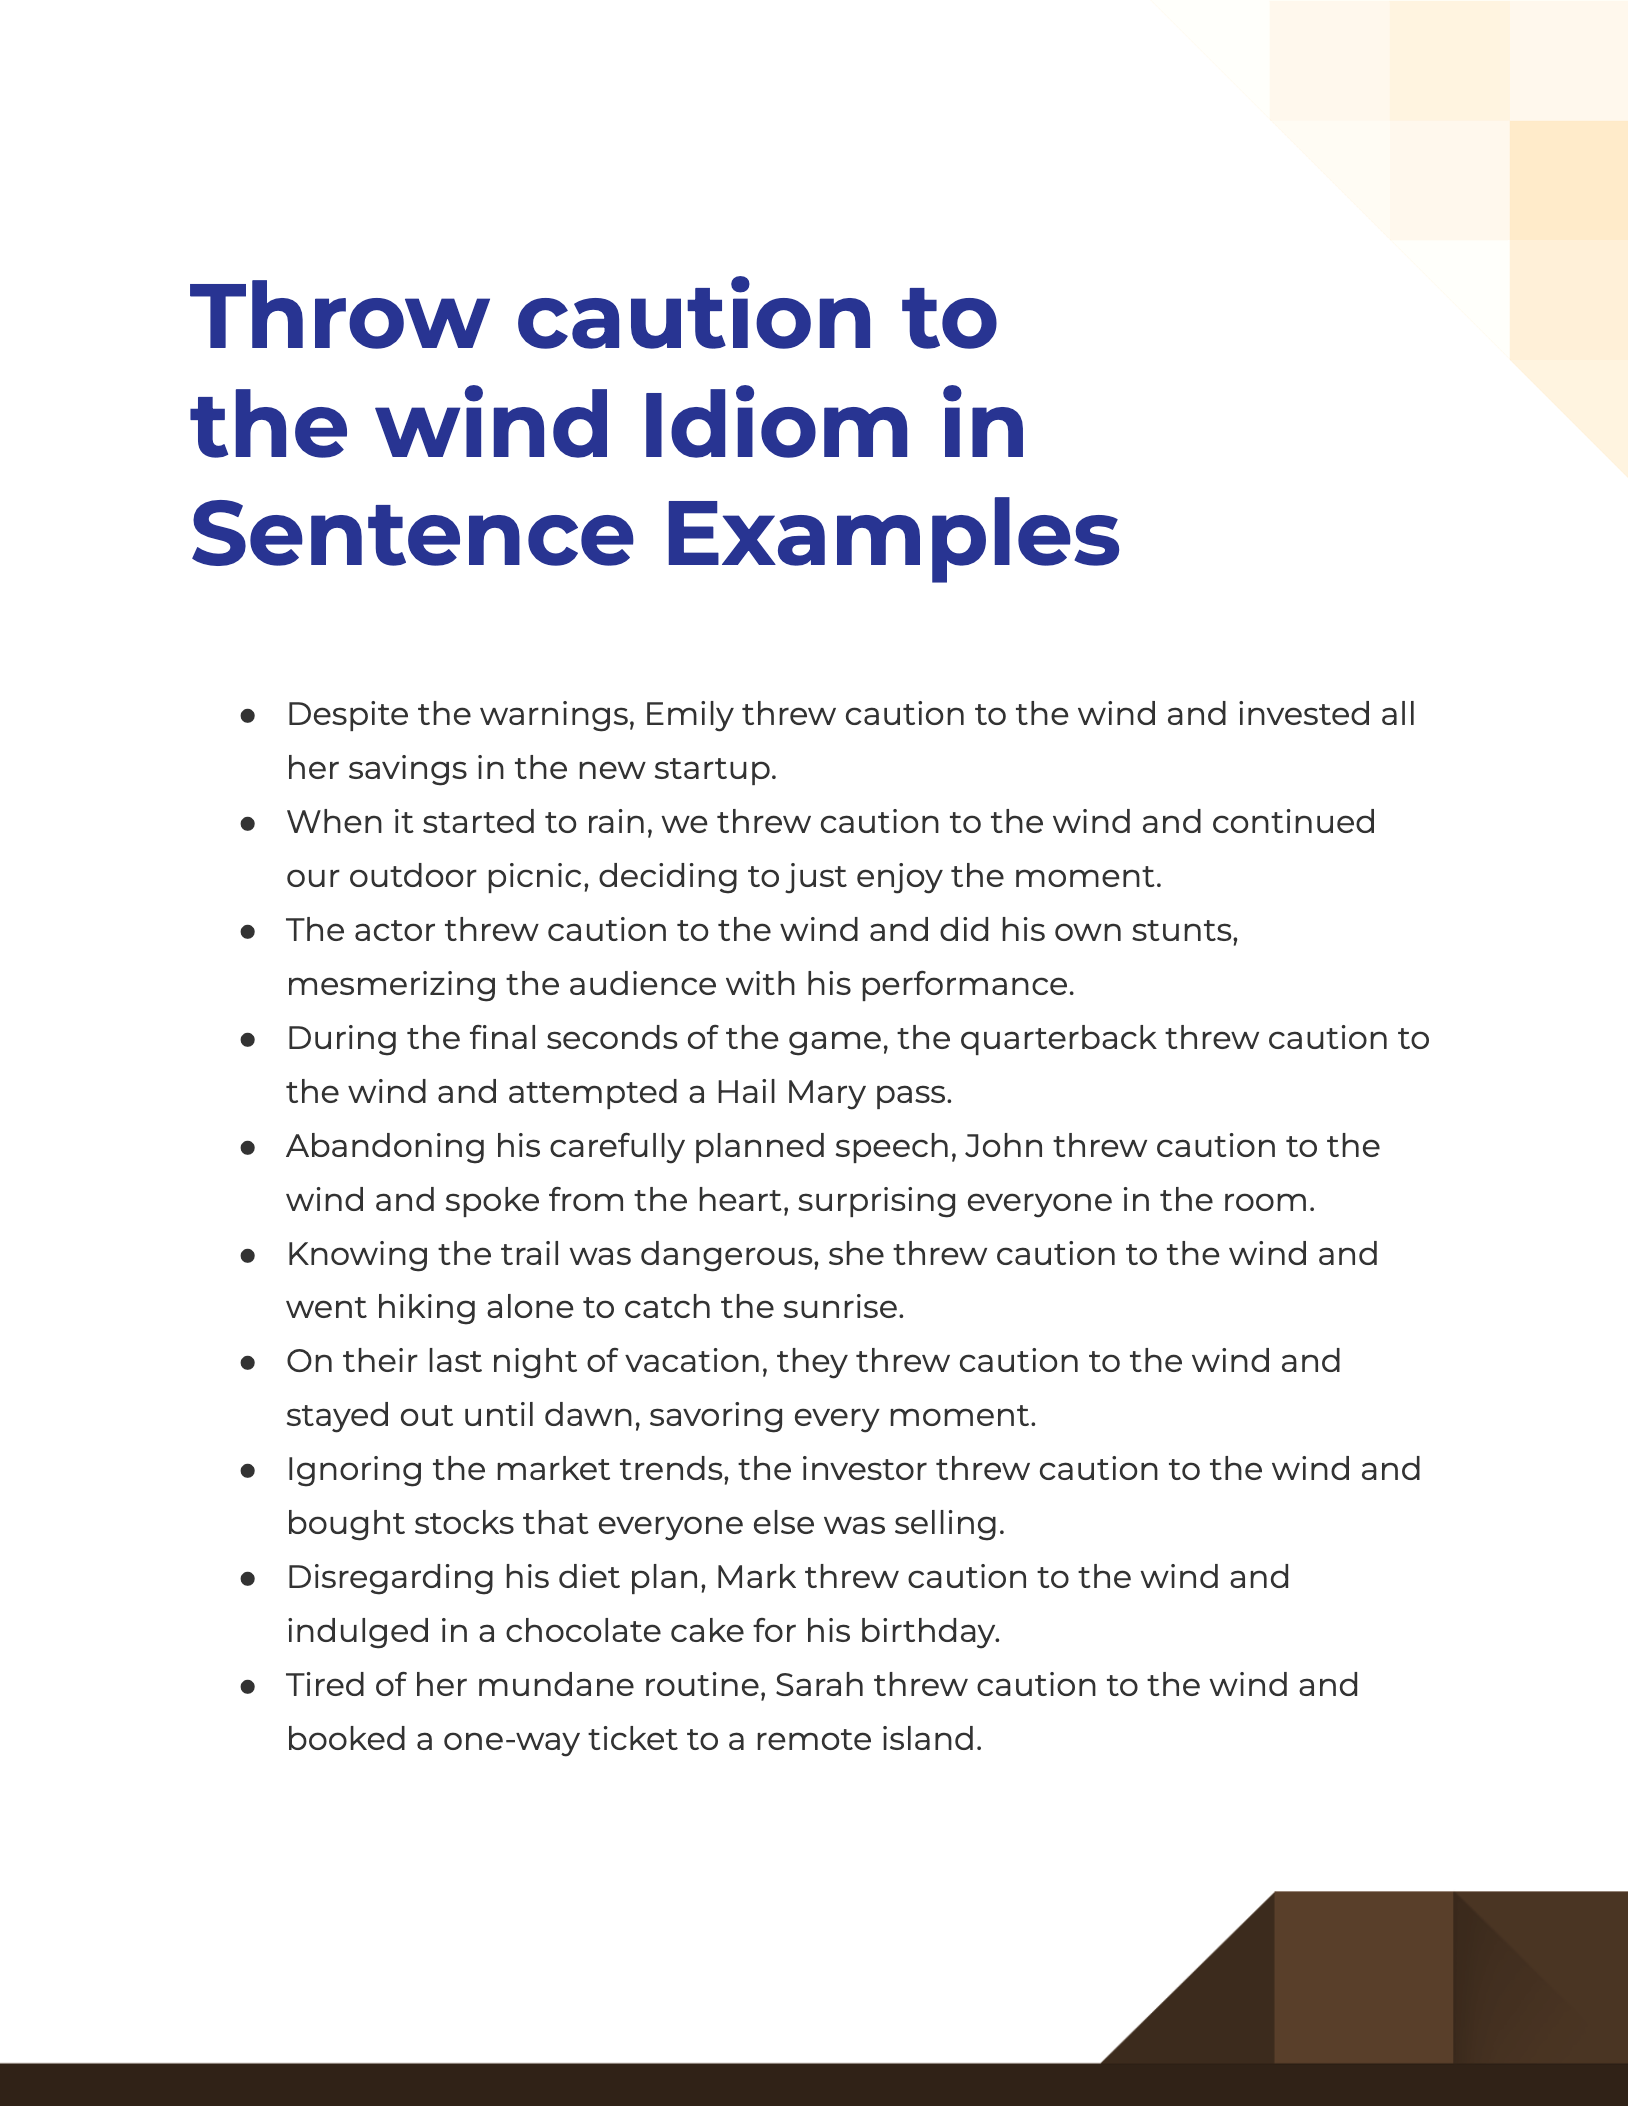 throw caution to the wind idiom1